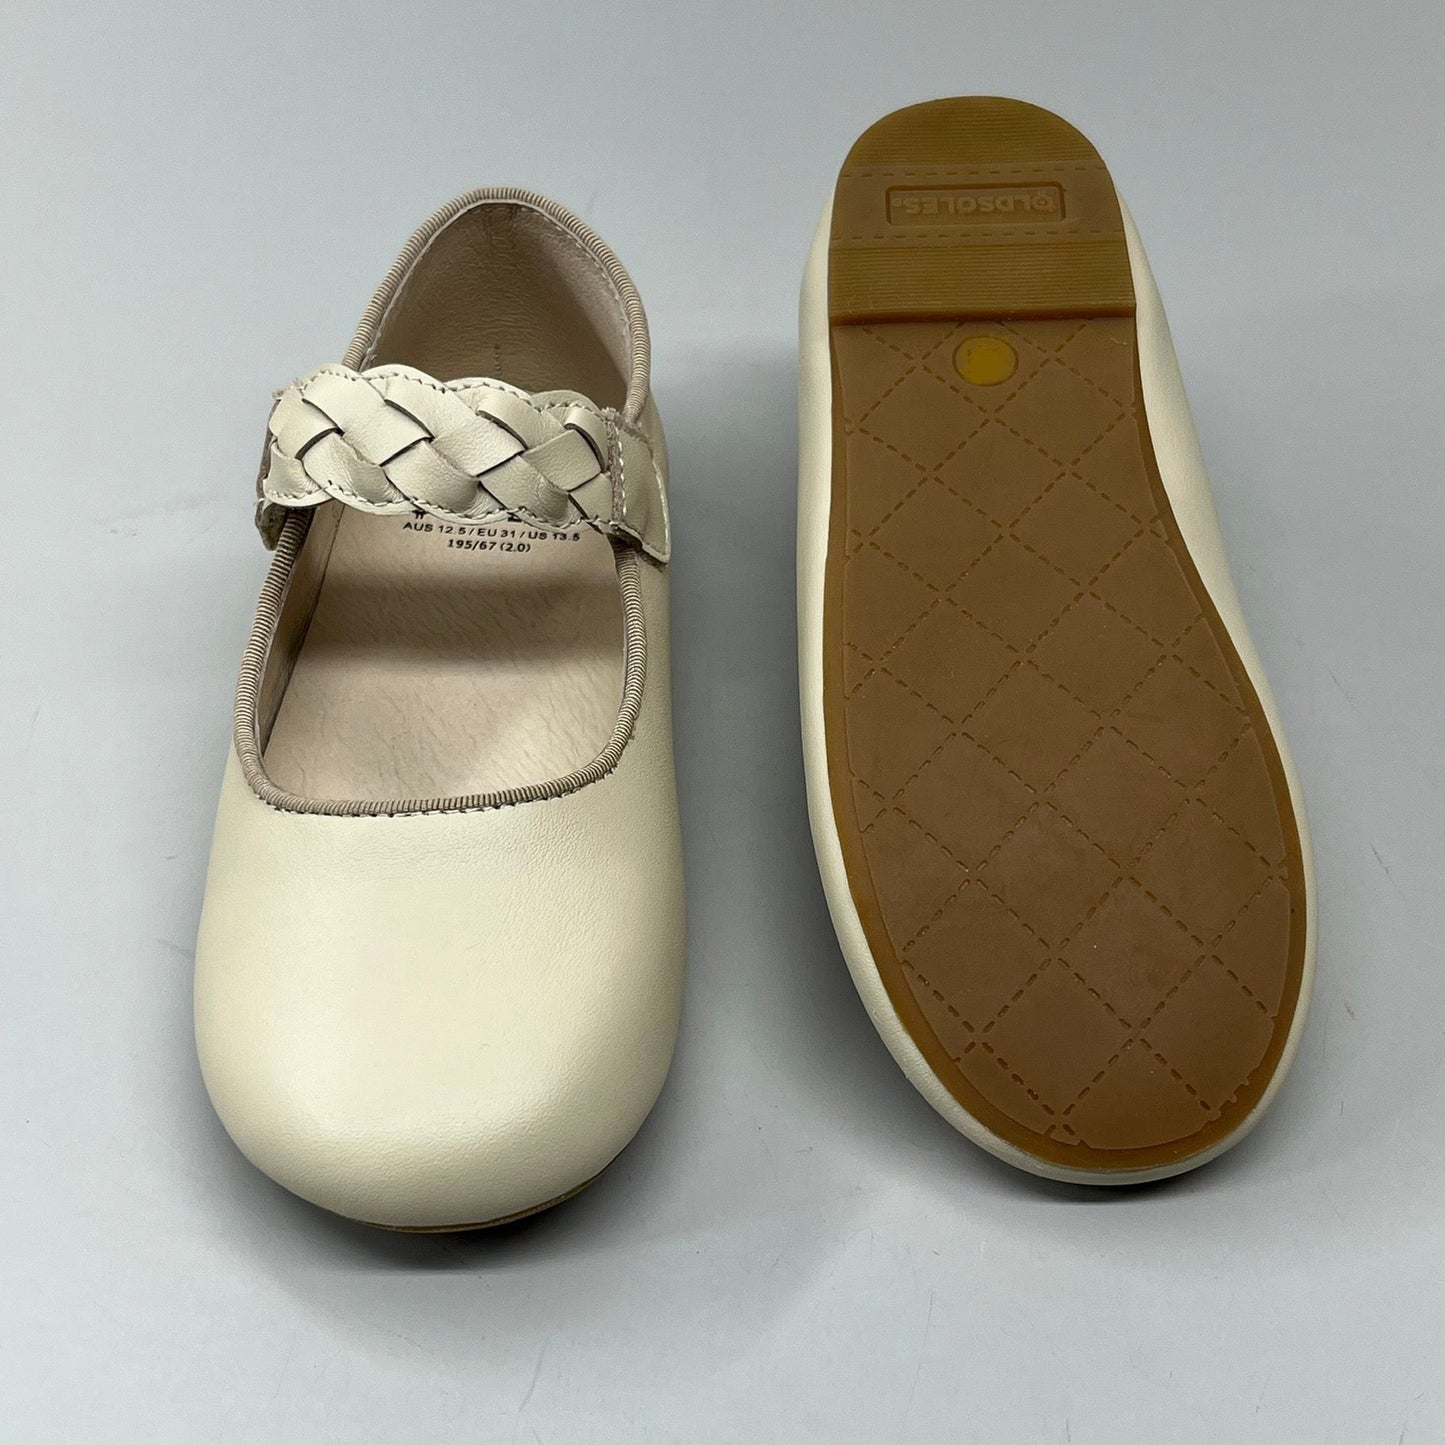 OLD SOLES Lady Plat Braided Strap Leather Shoe Kid’s Sz 23 US 7 Cream #817